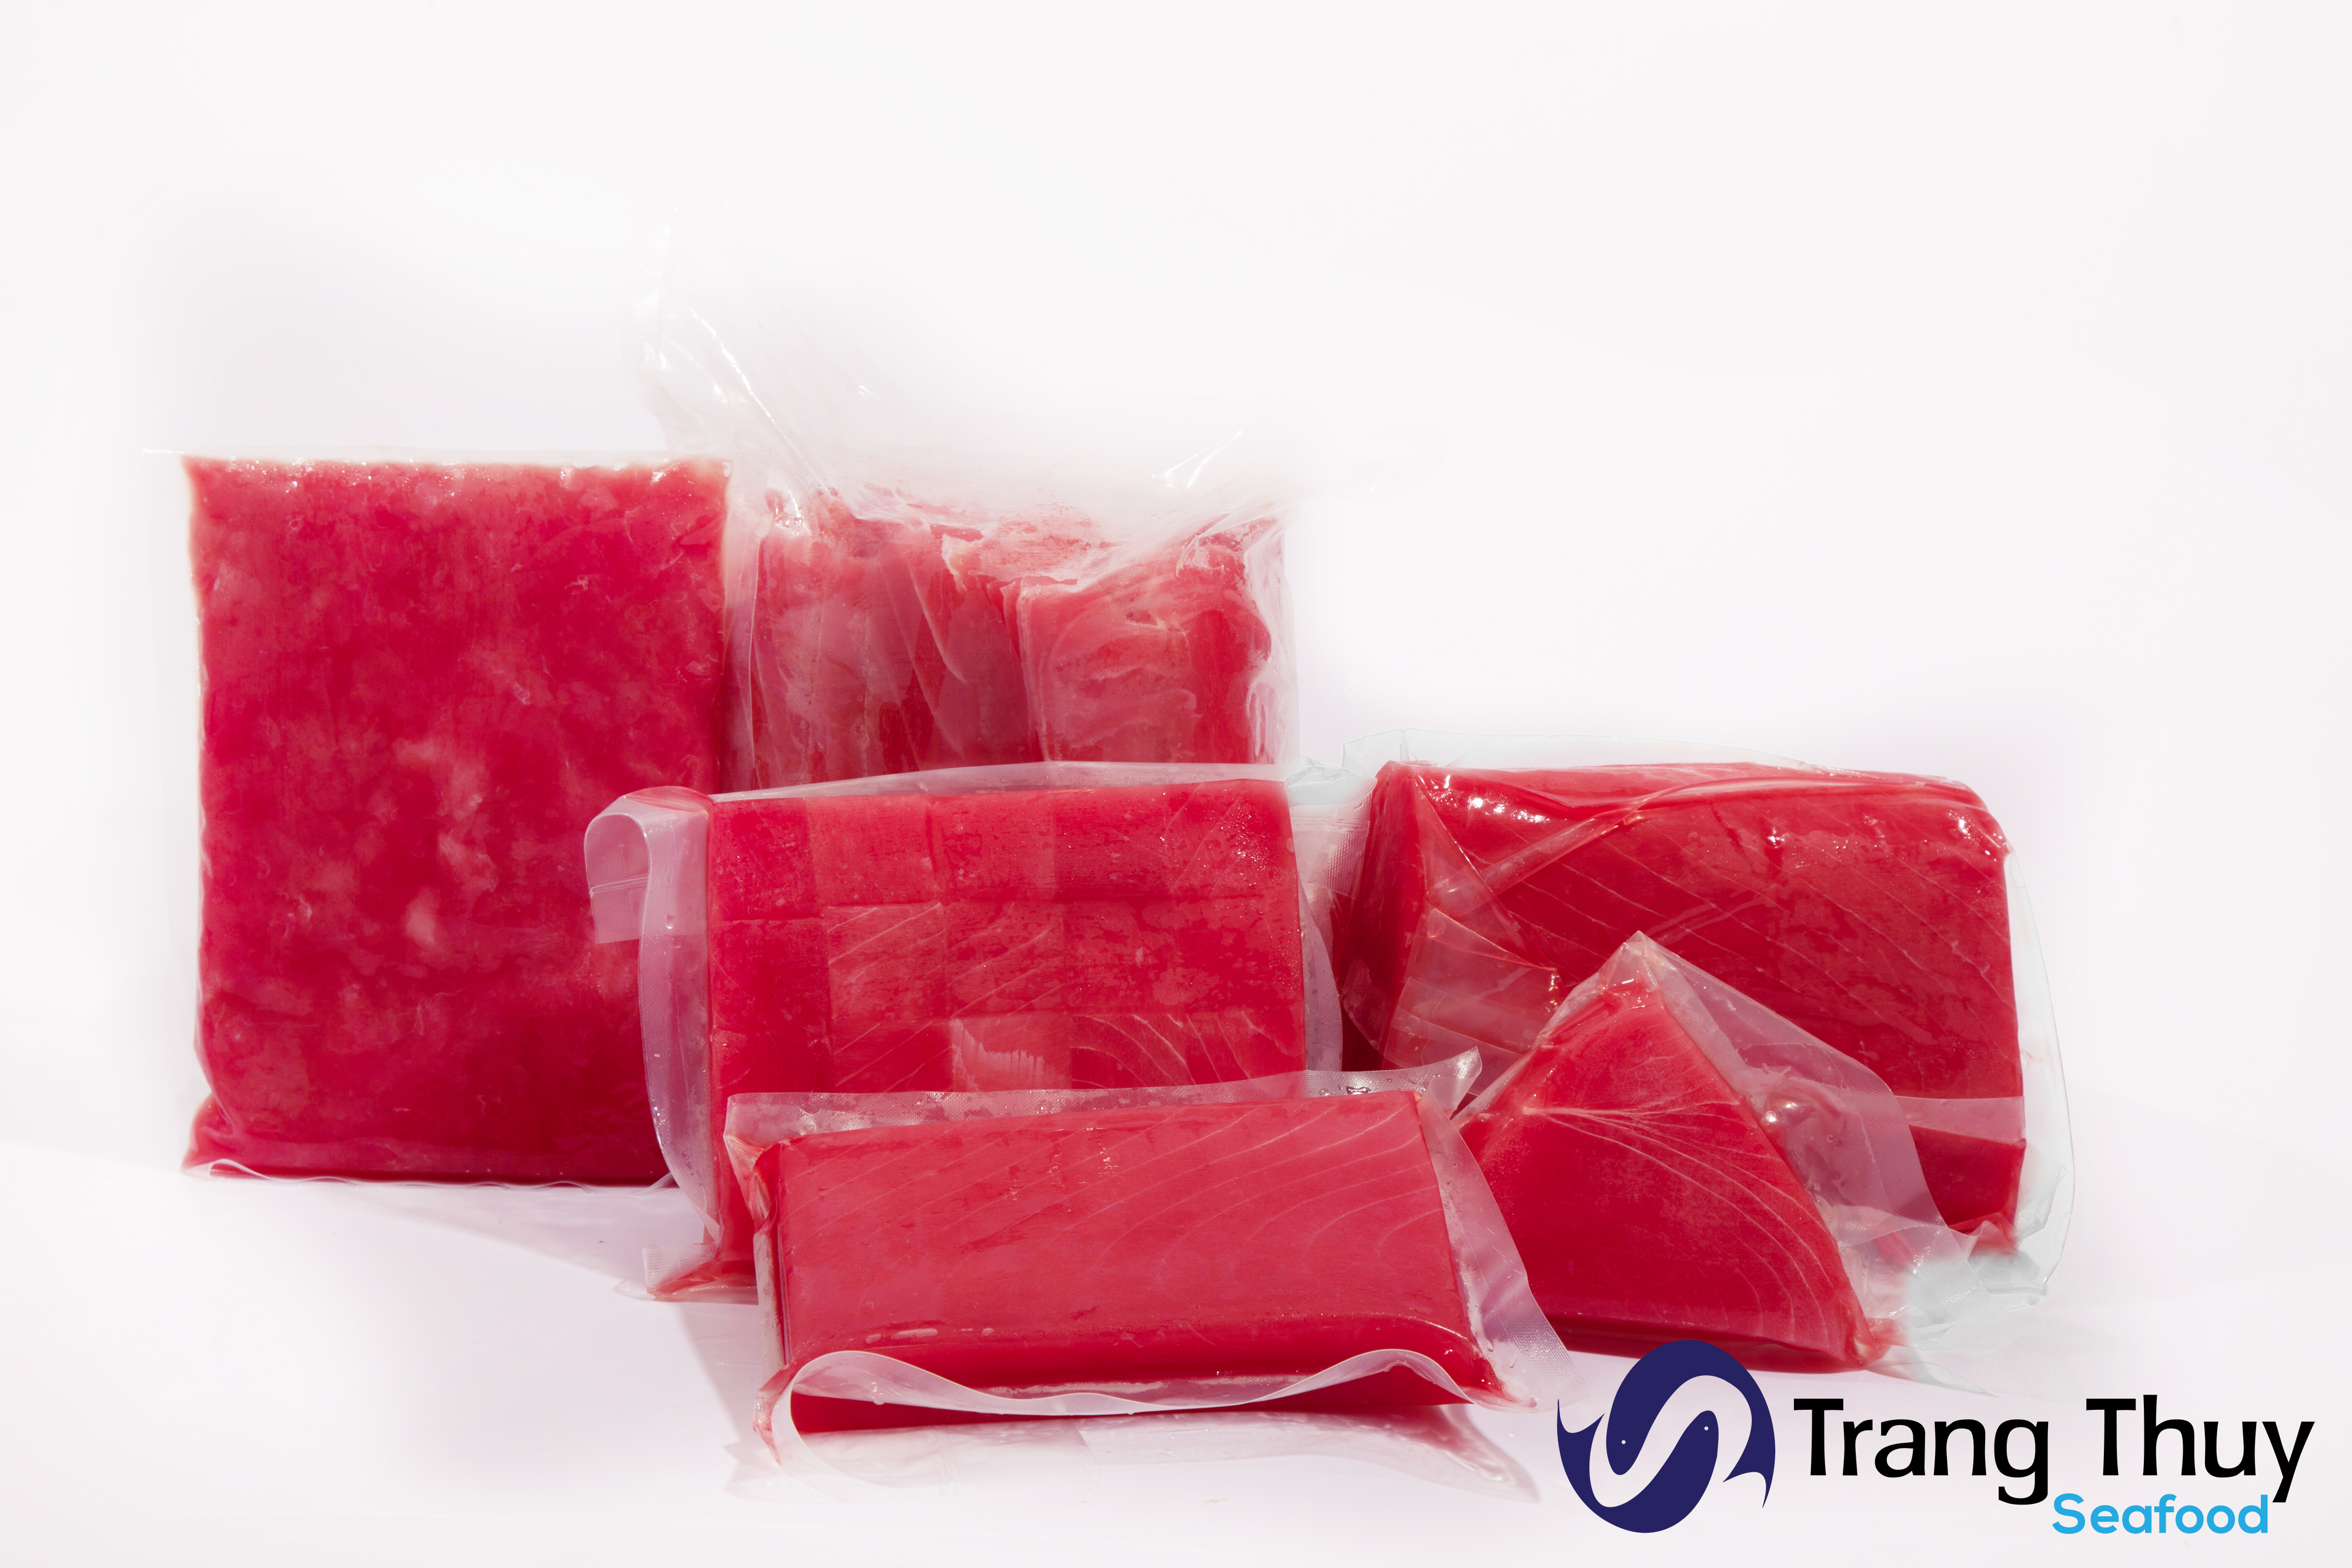 Frozen Yellowfin Tuna Products Treated With CO Produced By Trang Thuy Seafood For The US Market